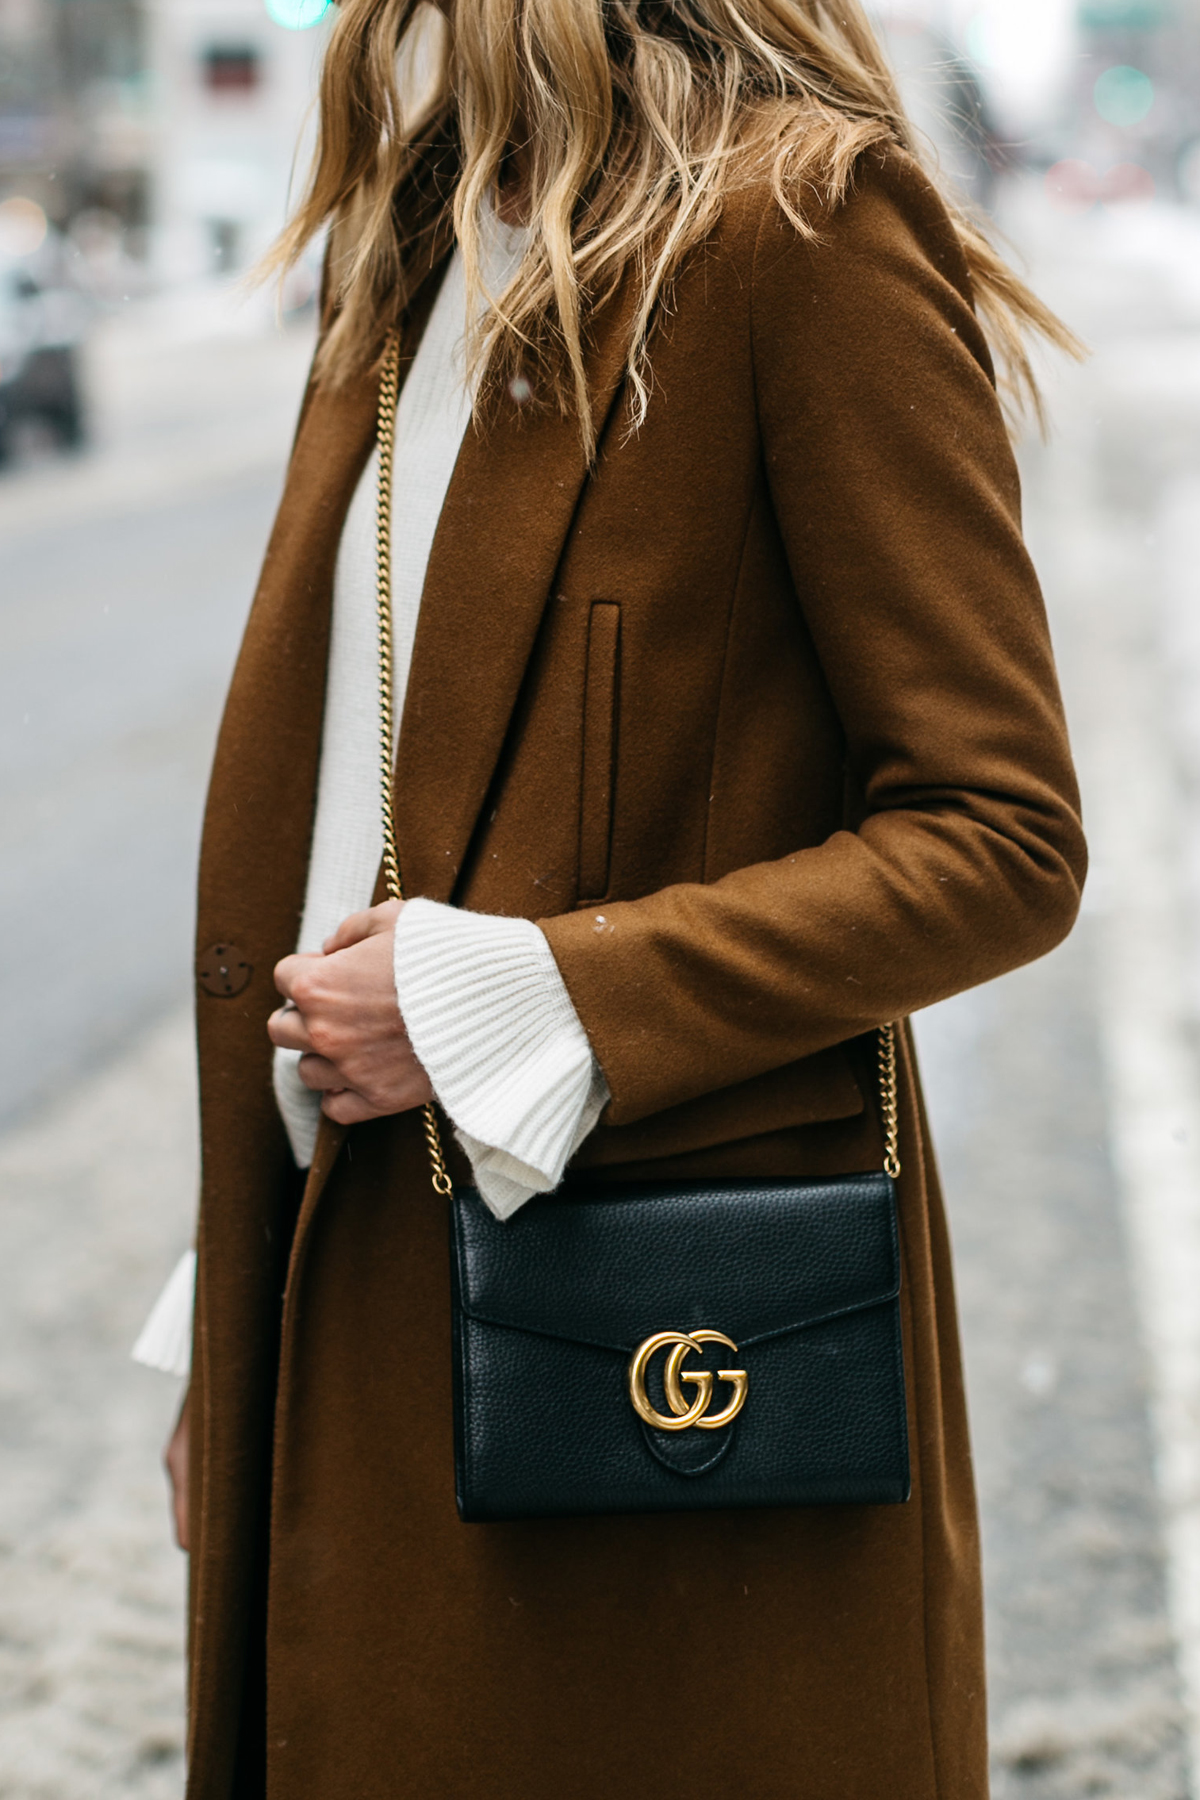 NYFW, Winter Outfit, Camel Wool Coat, White Ruffle Sleeve Sweater, Black Faux Leather Pants, Gucci Marmont Handbag, Street Style